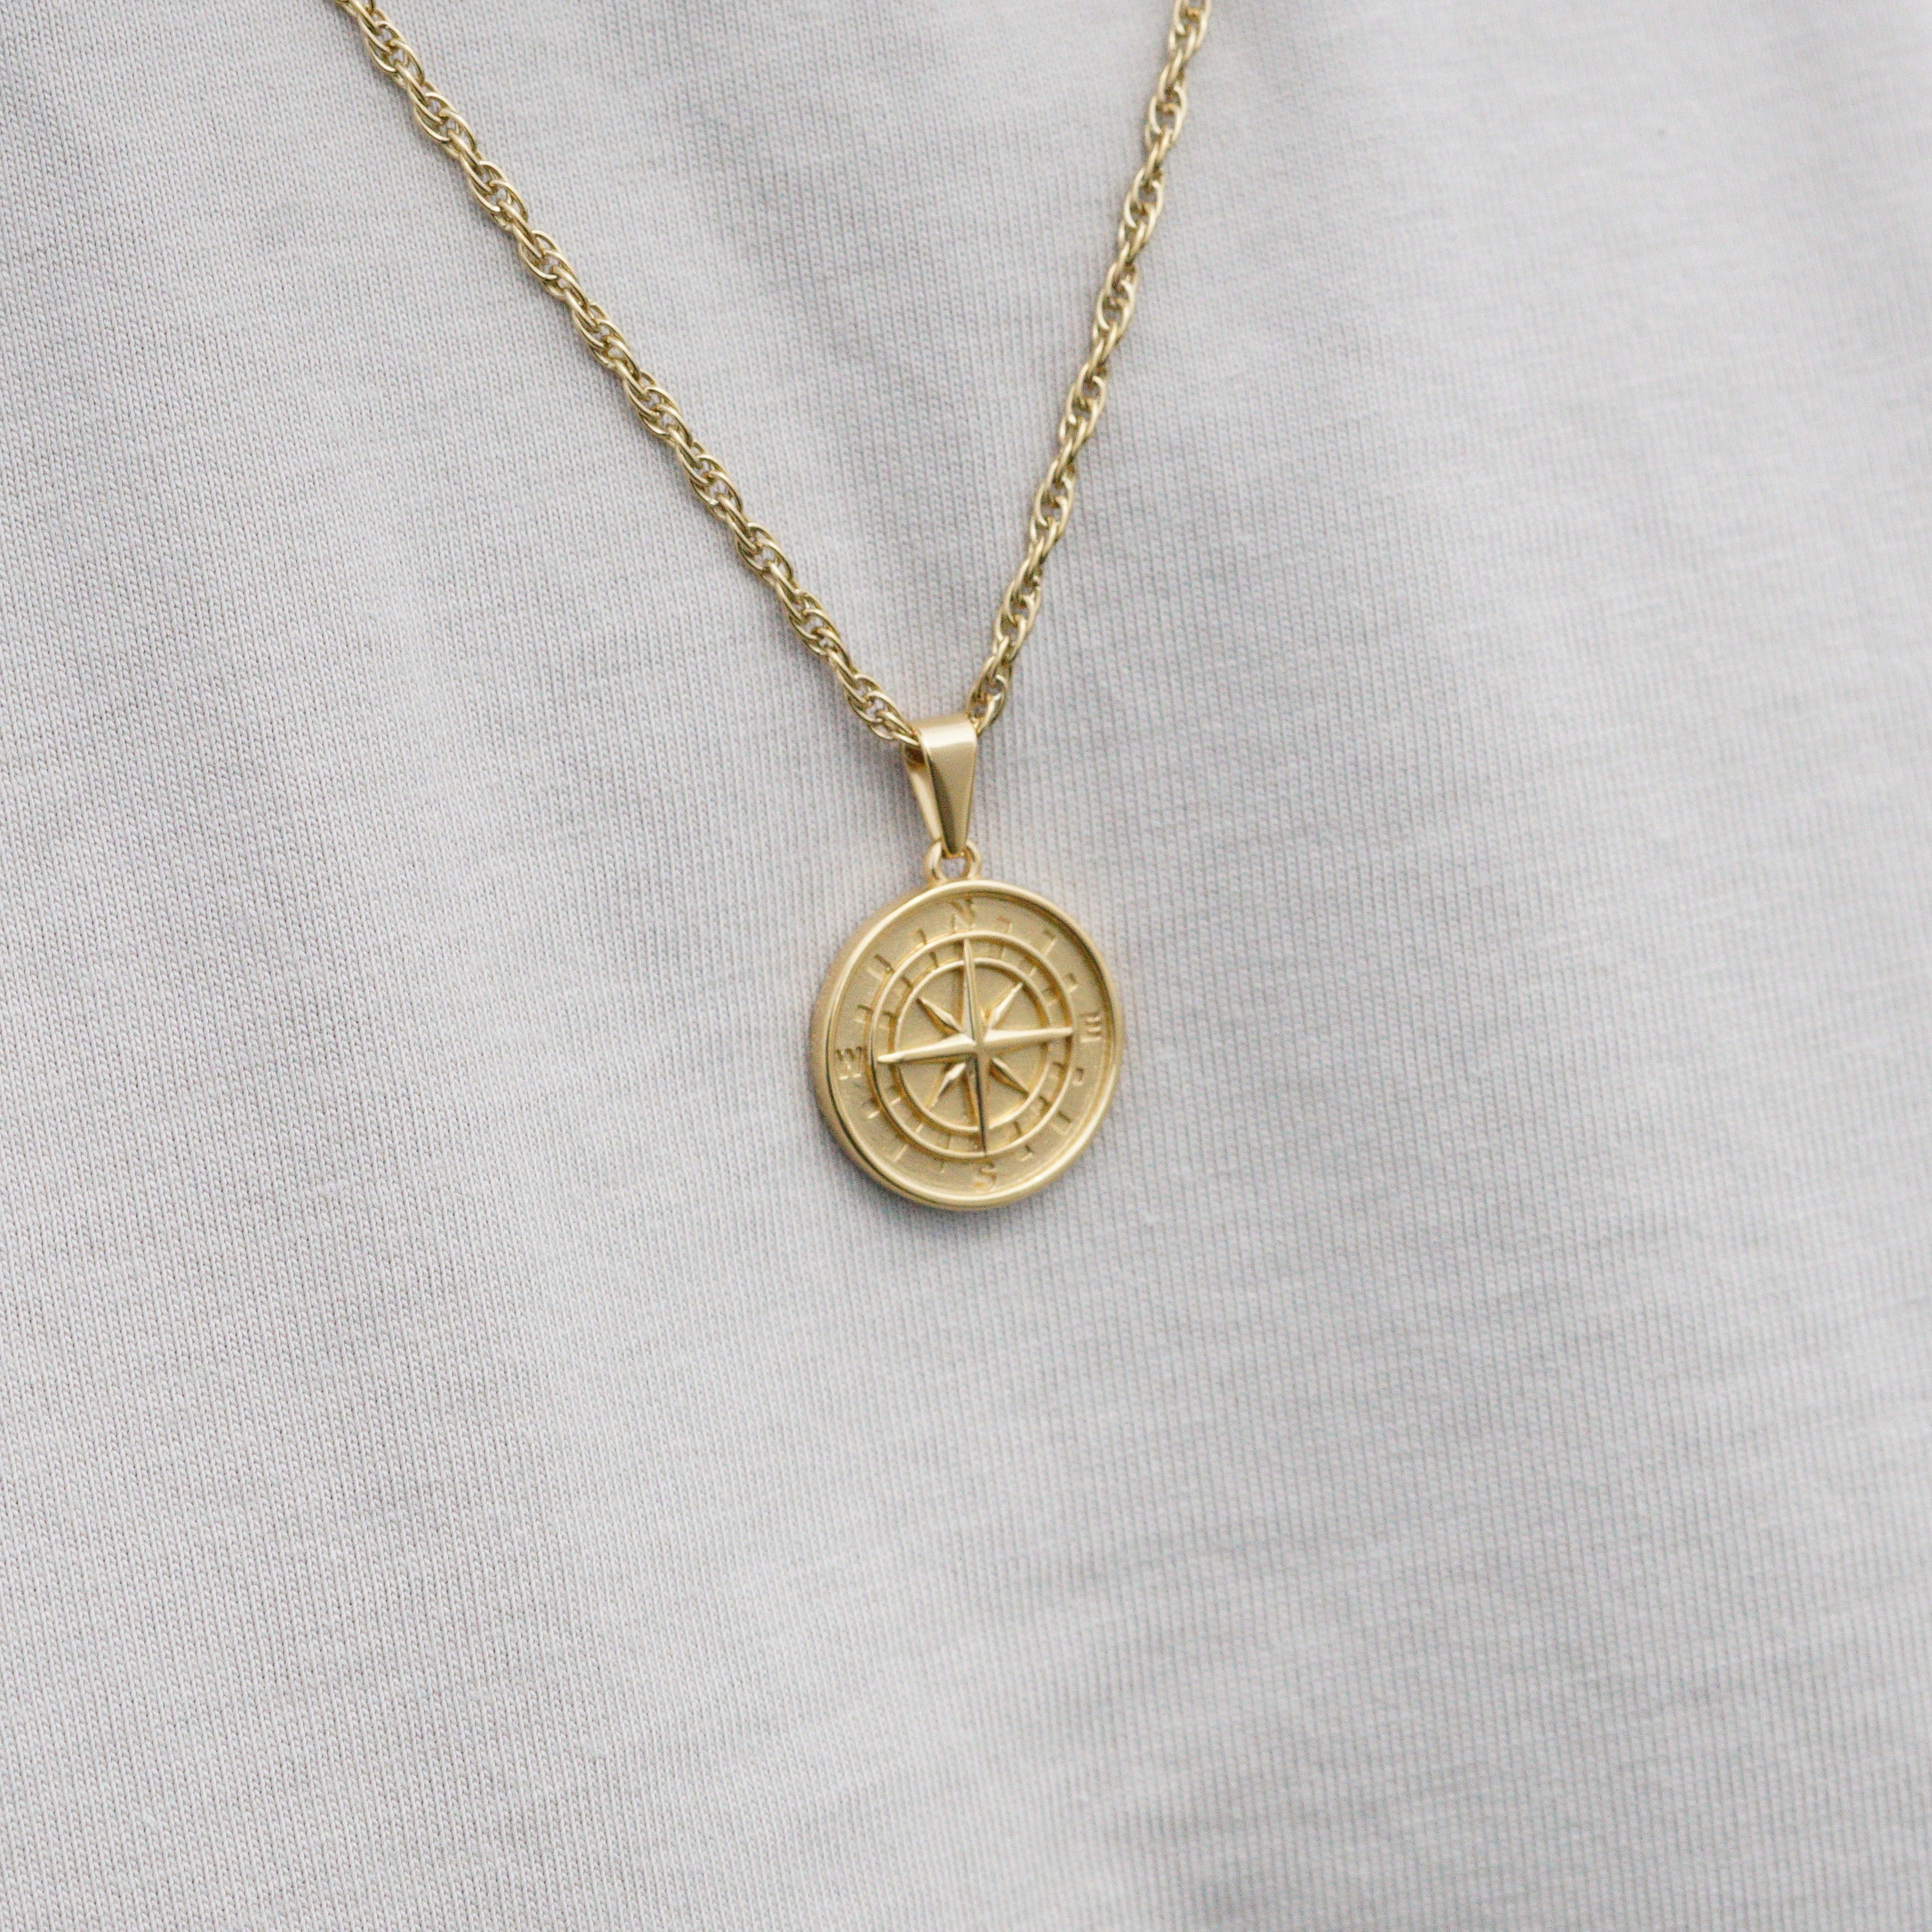 COMPASS NECKLACE - GOLD TONE